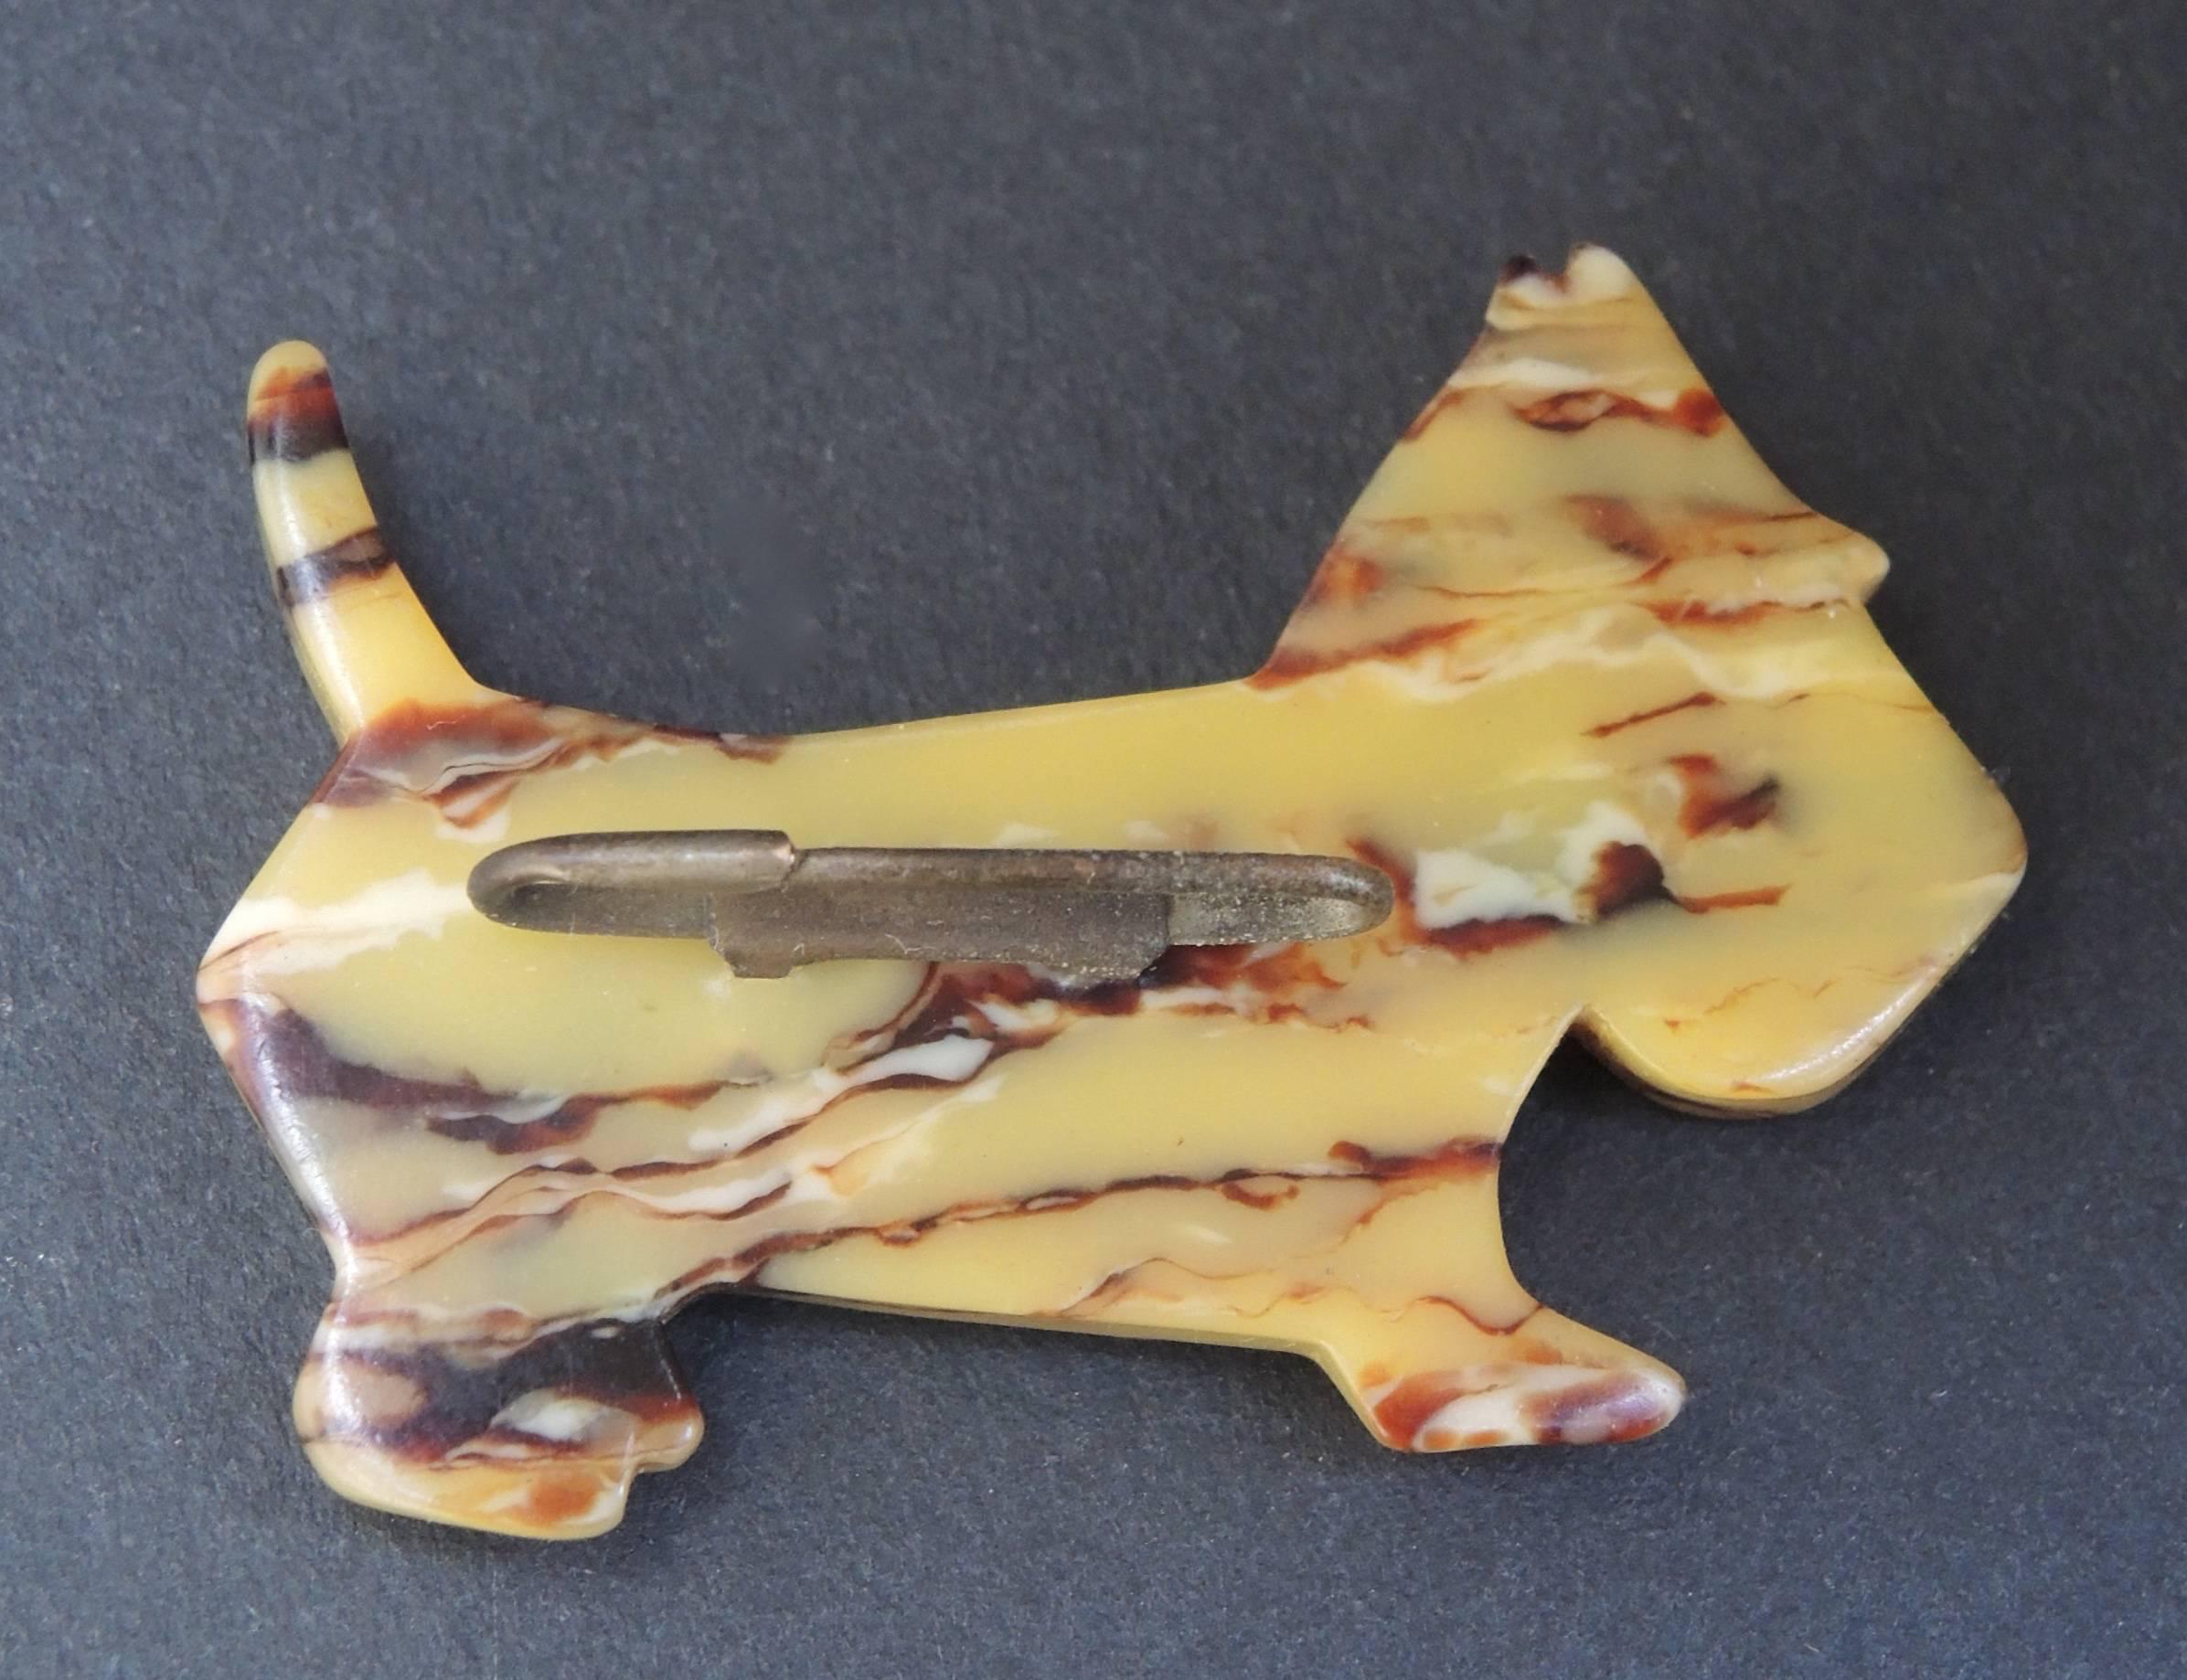 This iconic scottie dog pin made of tortoise coloured bakelite will match any ensemble. Completely original and ready to use on a daily basis. Pin it to your lapel or to a hat for a touch of vintage sophistication.